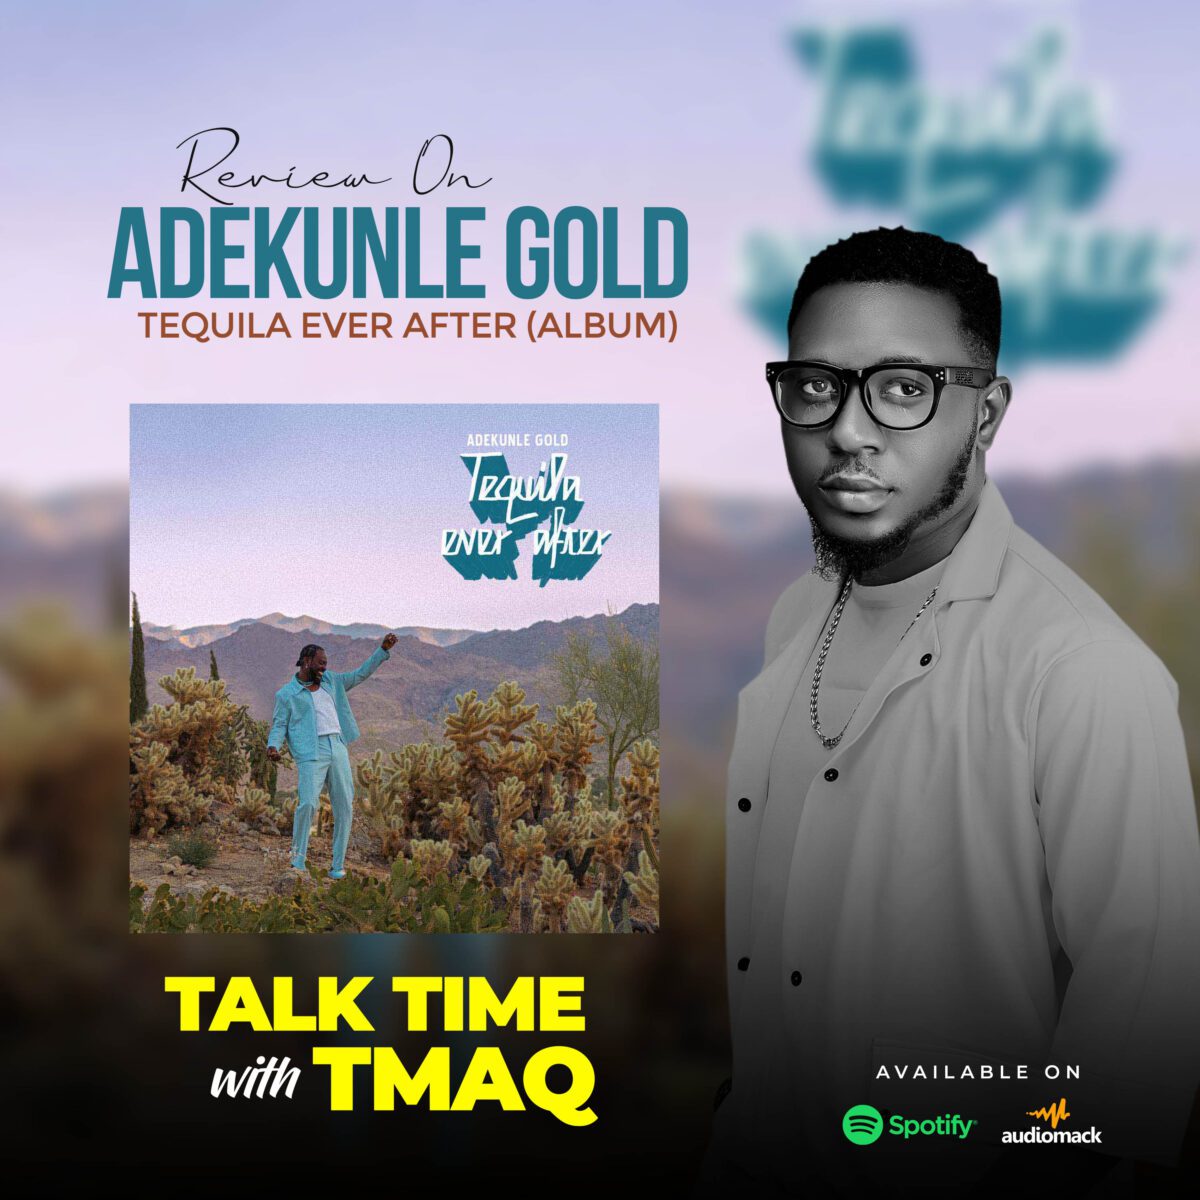 Talk Time With Tmaq - Review of Adekunle Gold Album Tequila Ever After